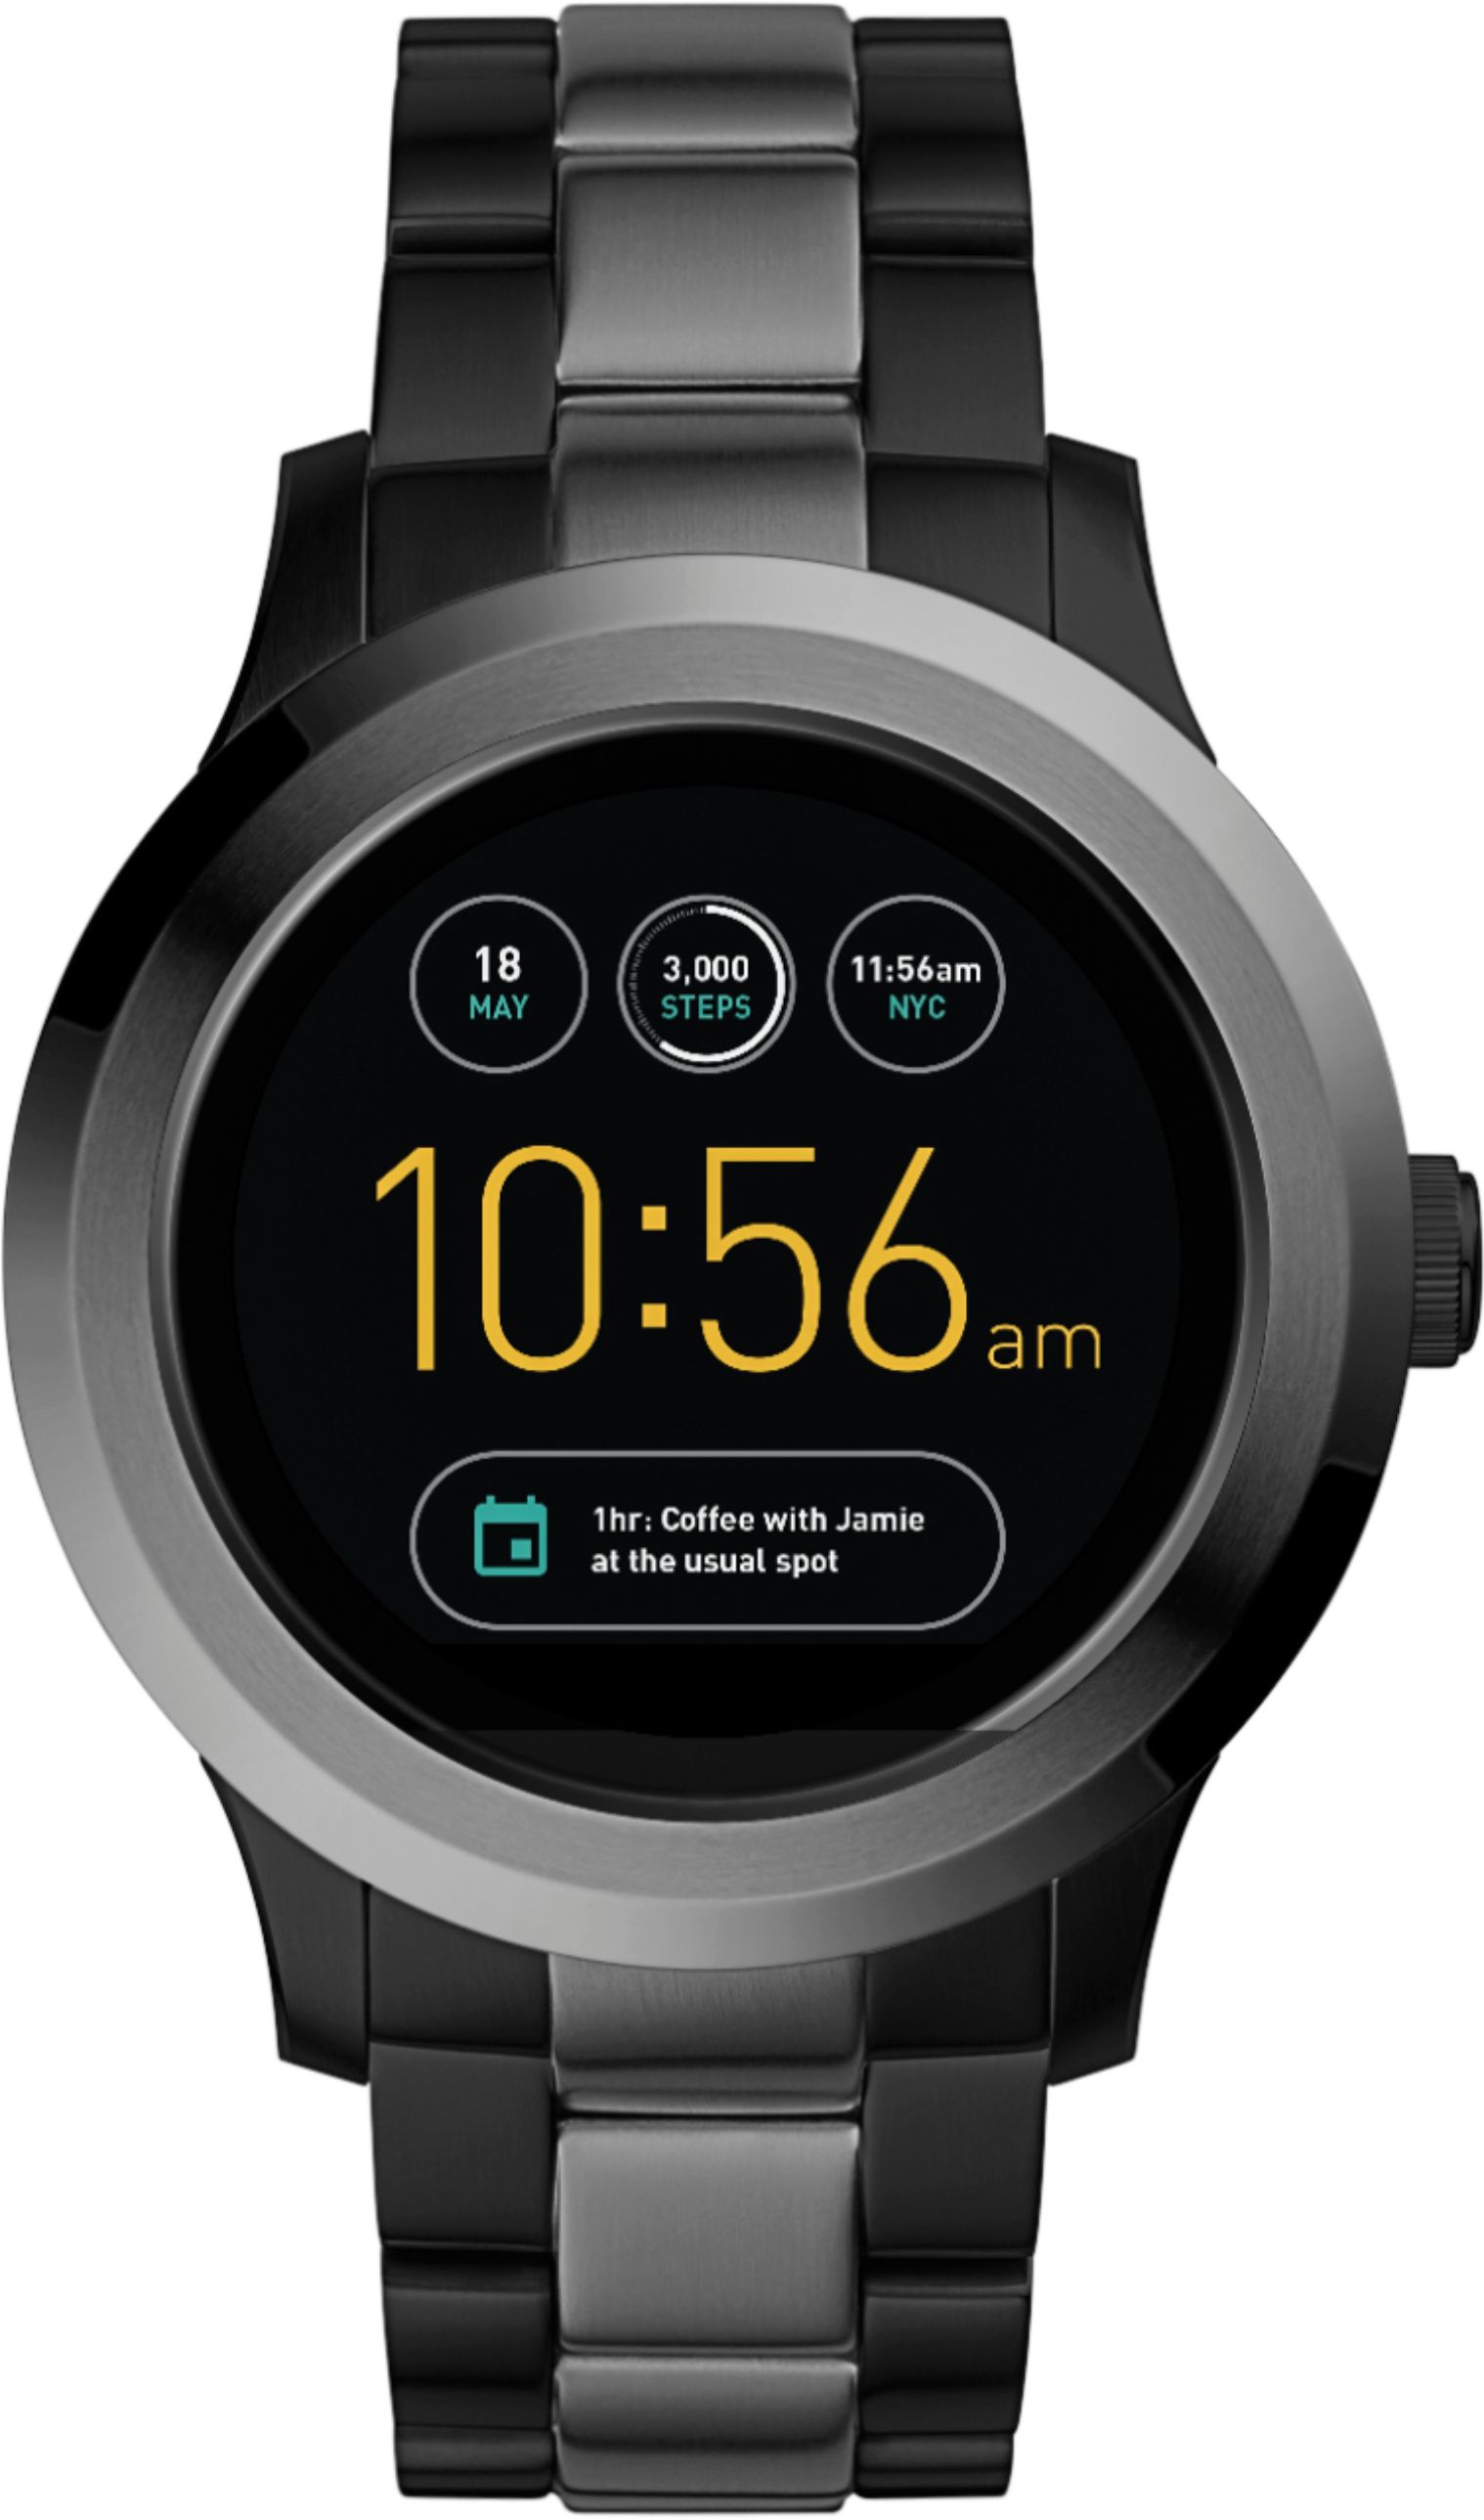 Fossil Q Founder 2 Smartwatch Stainless Steel Black/Gray FTW2117 - Best Buy